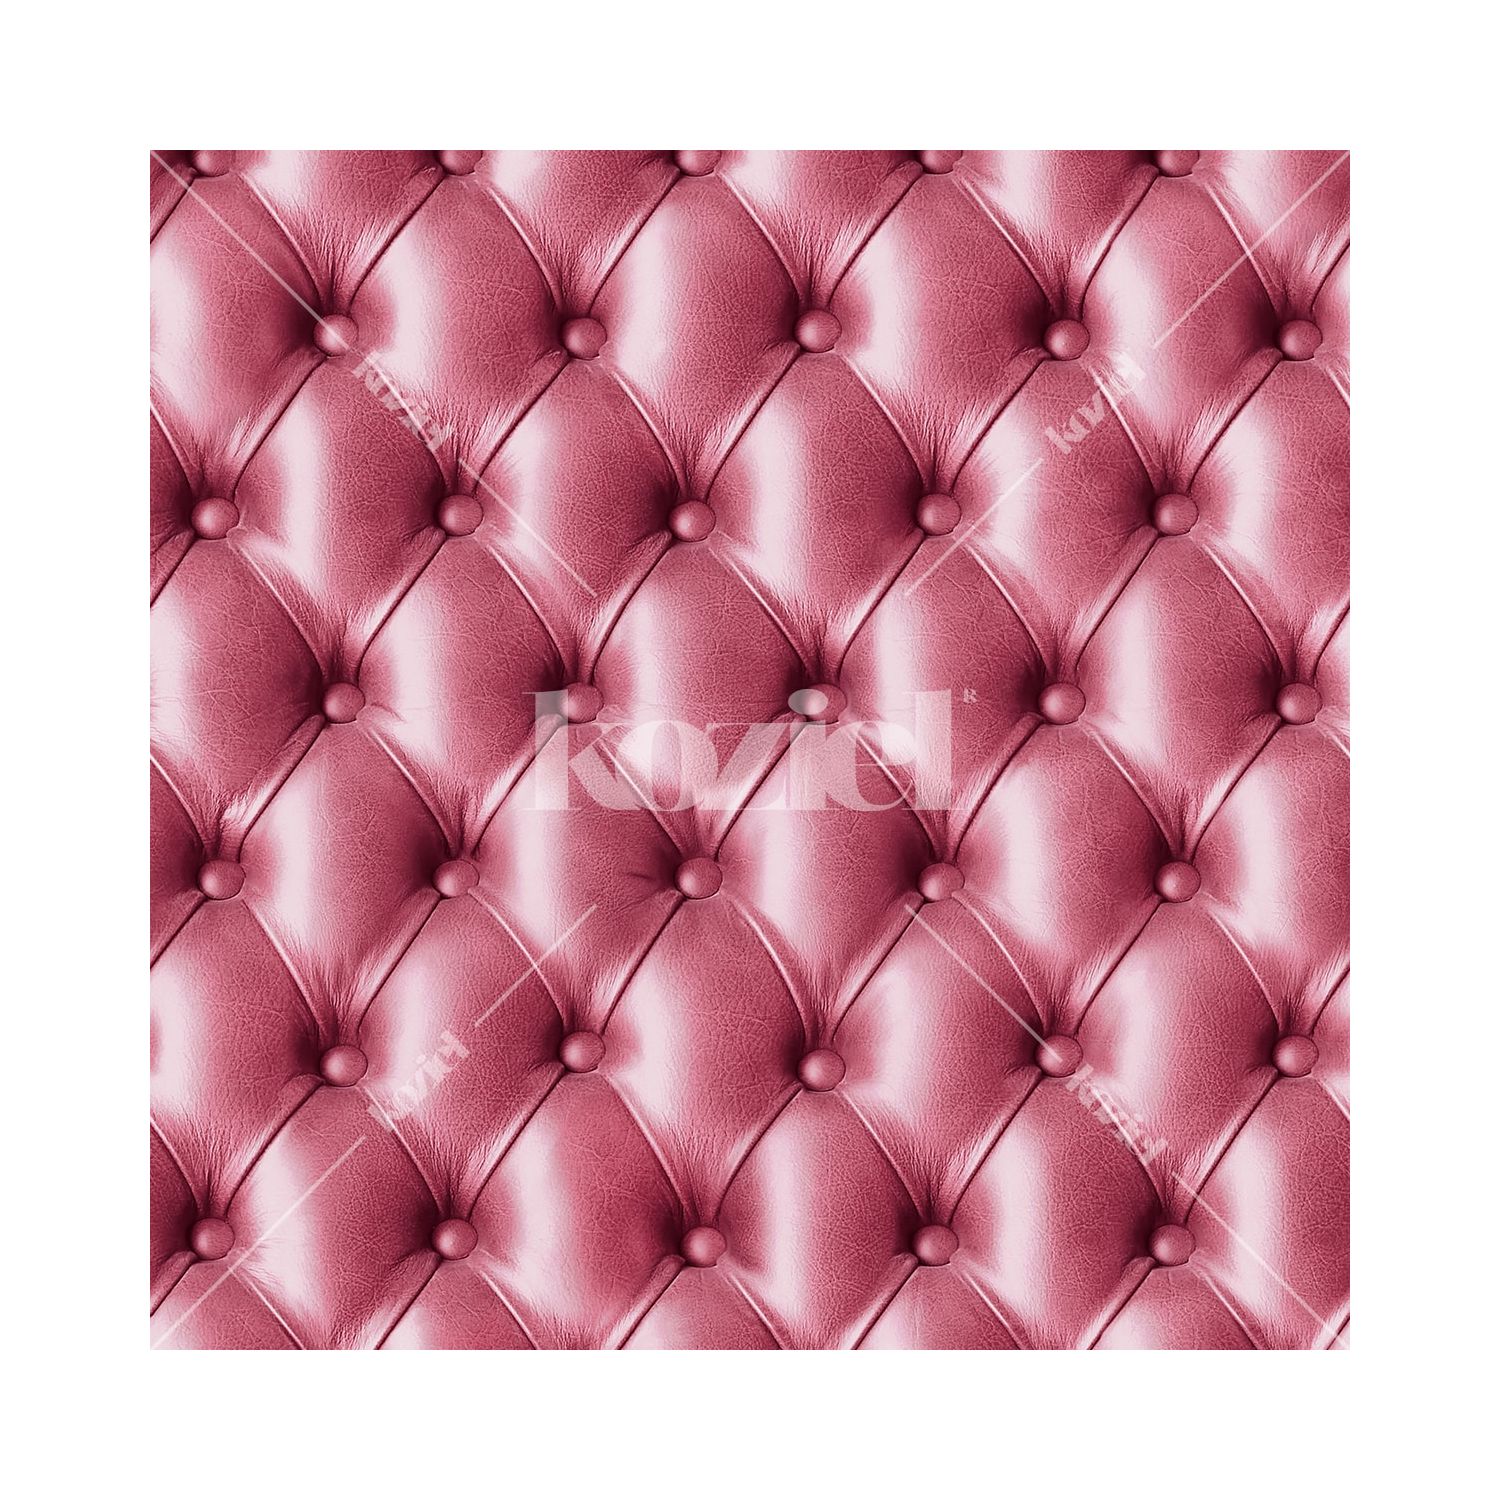 Pink Tufted Leather Wallpaper, What Is Tufted Leather